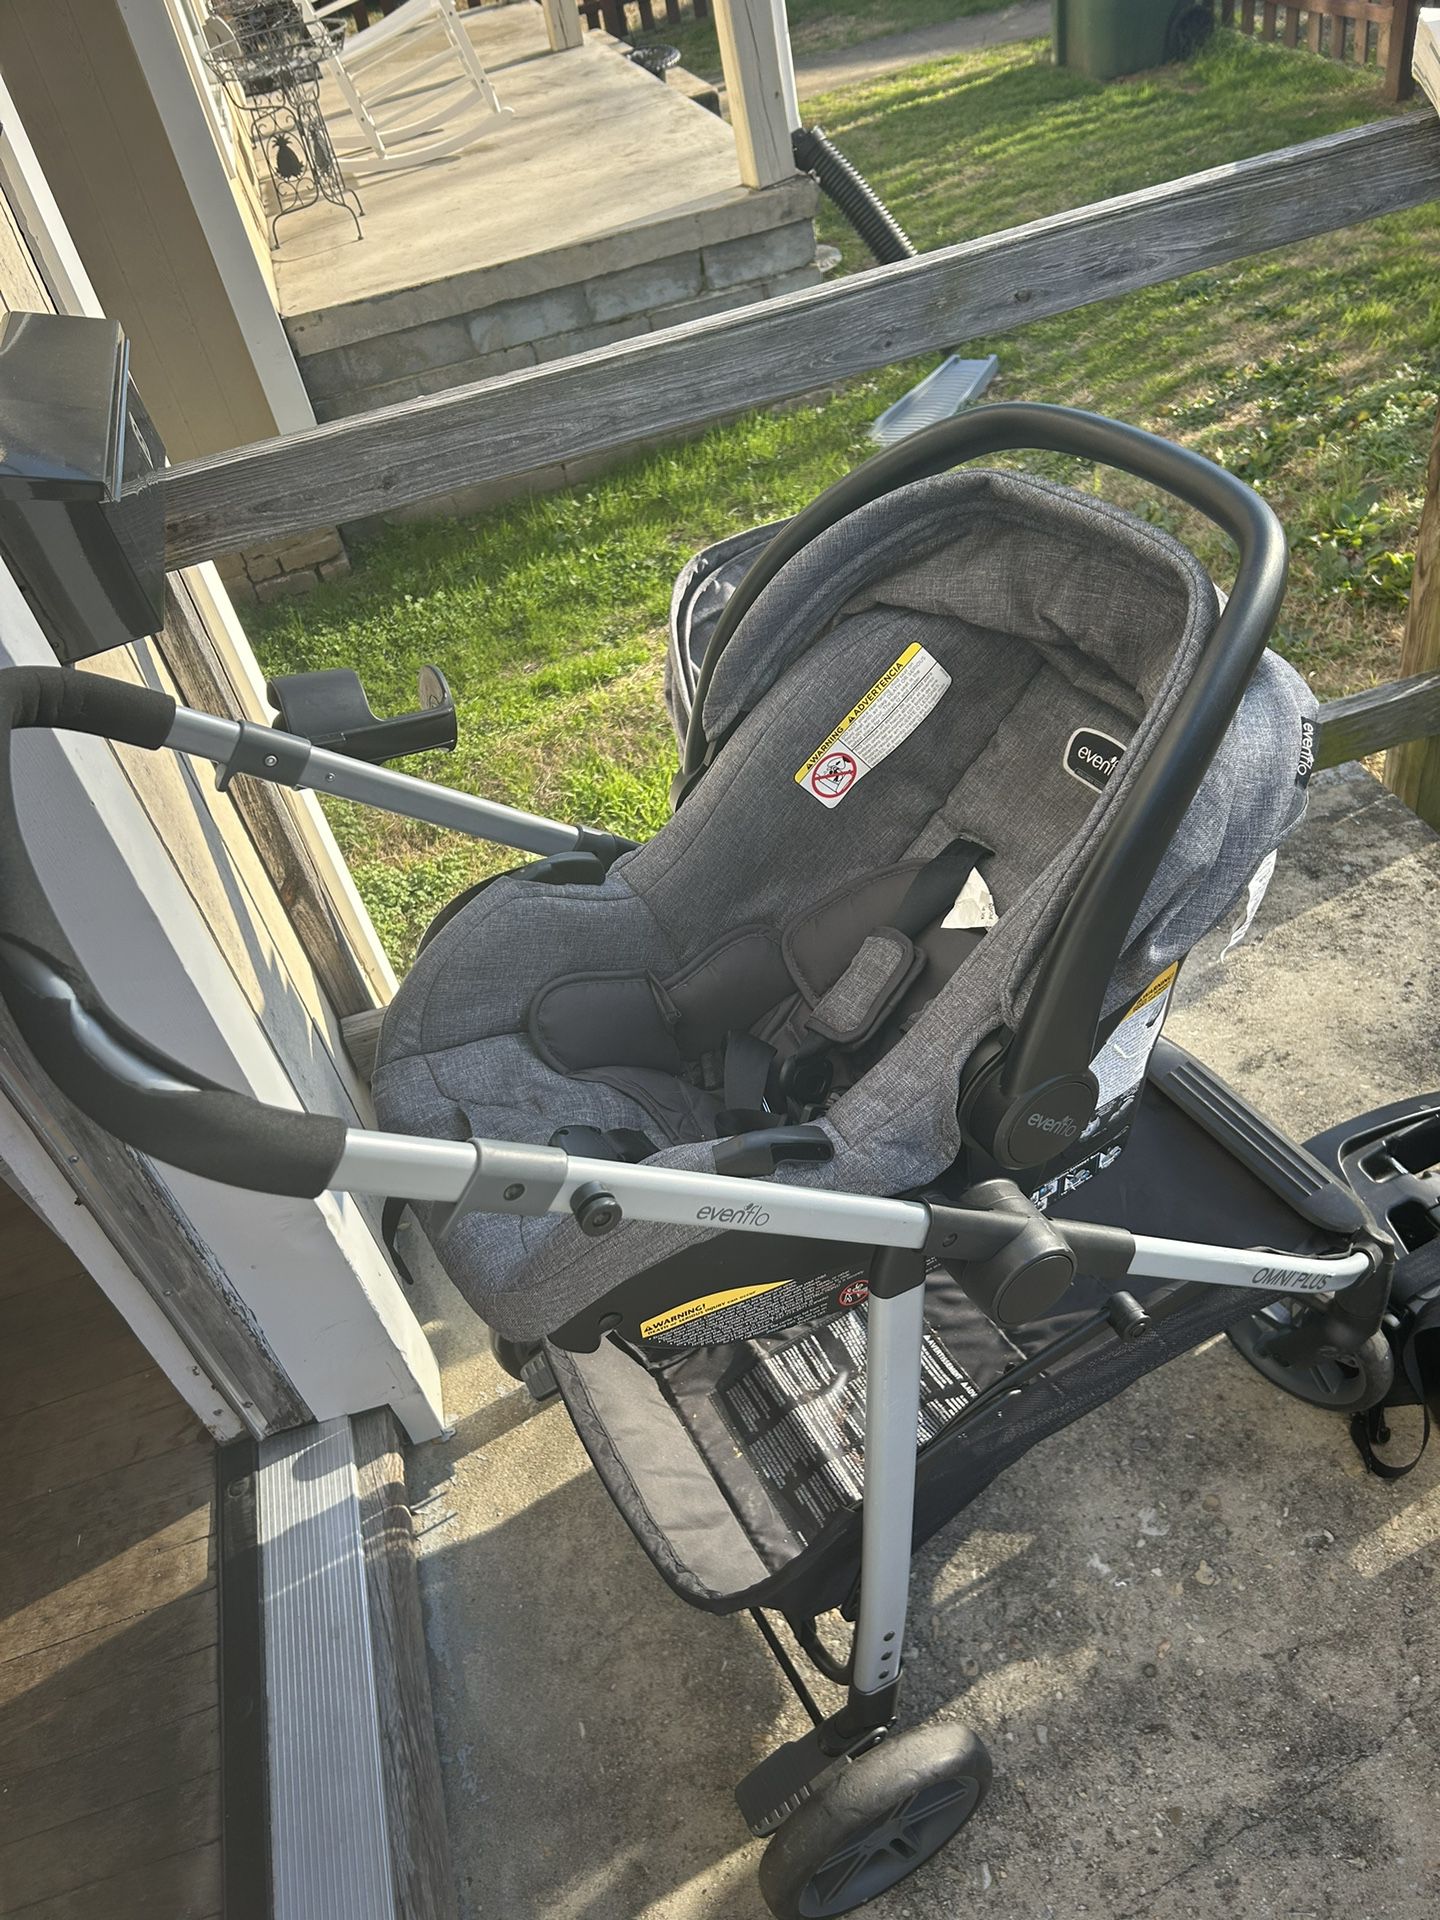 Even Flo Car Seat And Stroller Combo